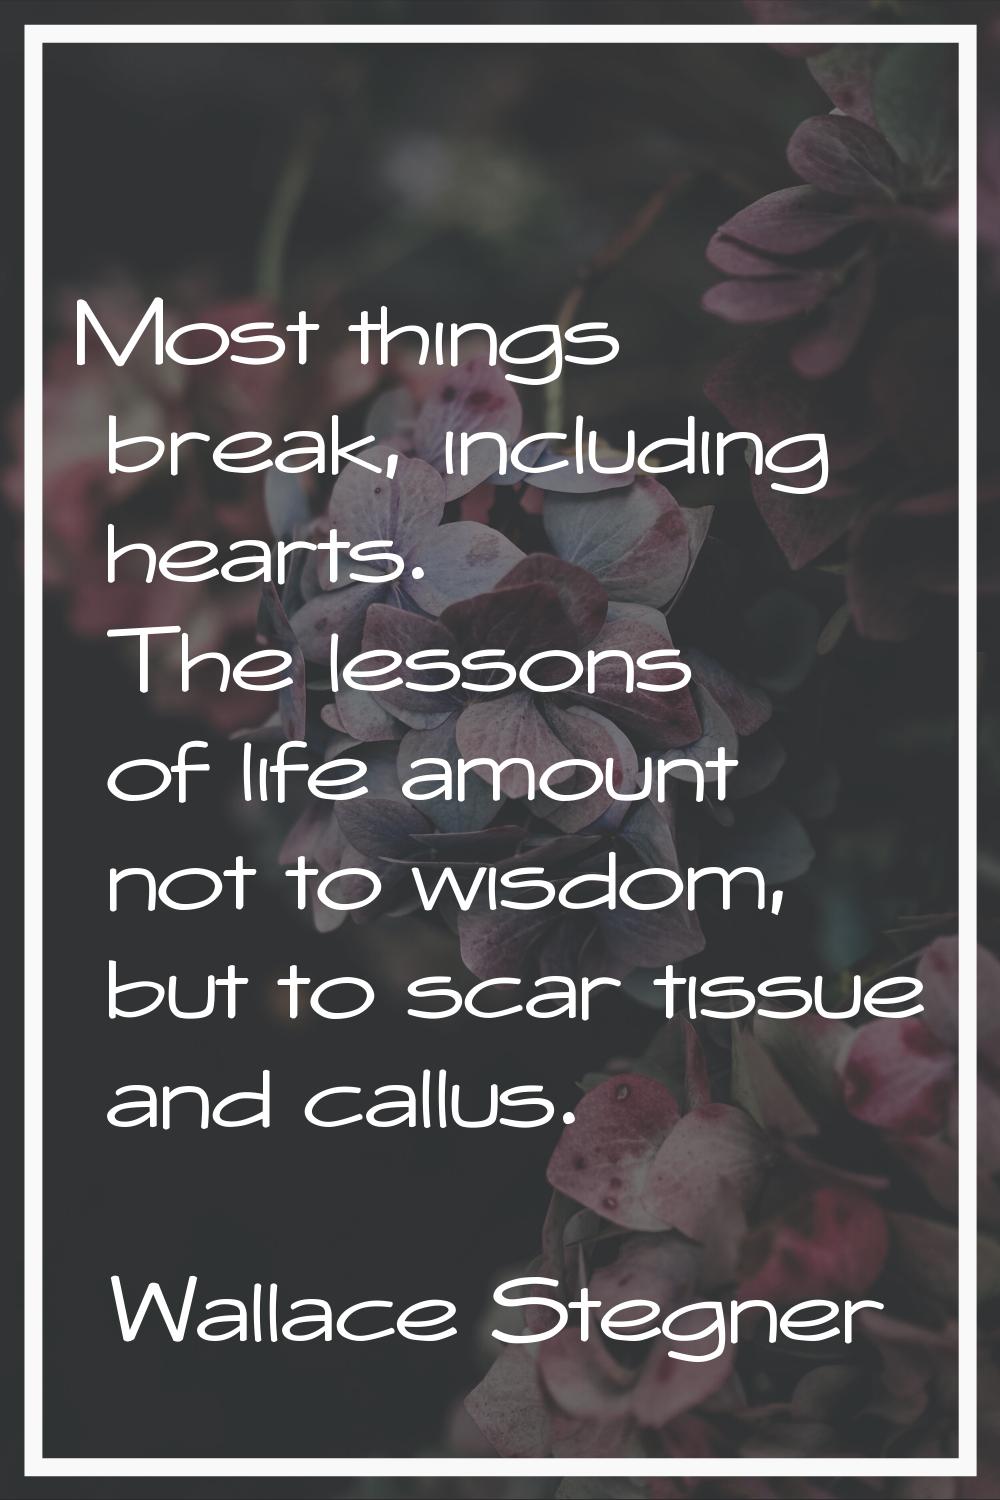 Most things break, including hearts. The lessons of life amount not to wisdom, but to scar tissue a